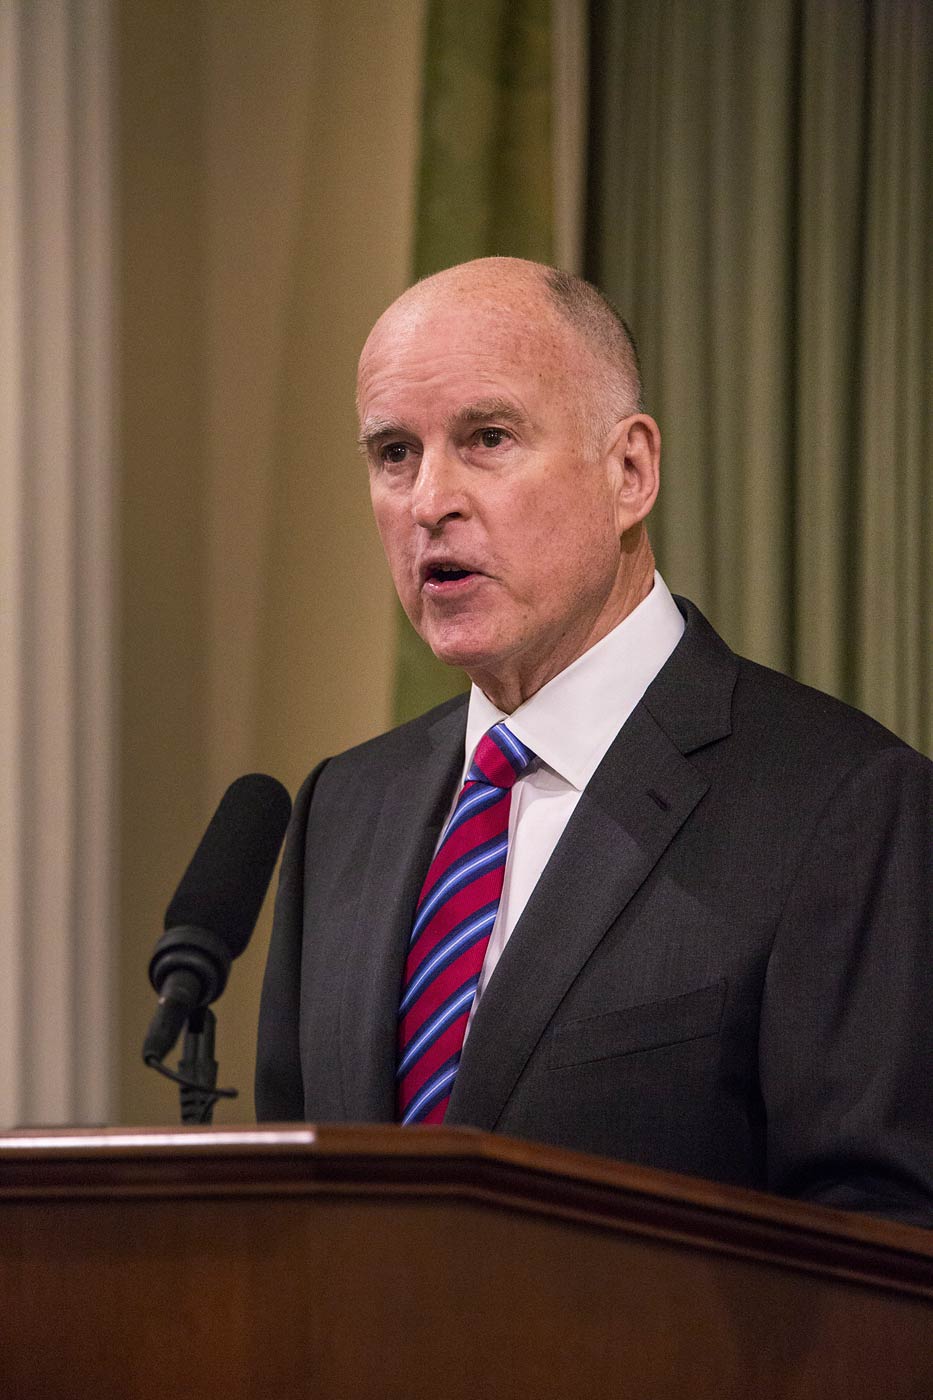 California Governor Jerry Brown Calls For Adding $2.8 Billion To Reserve Fund